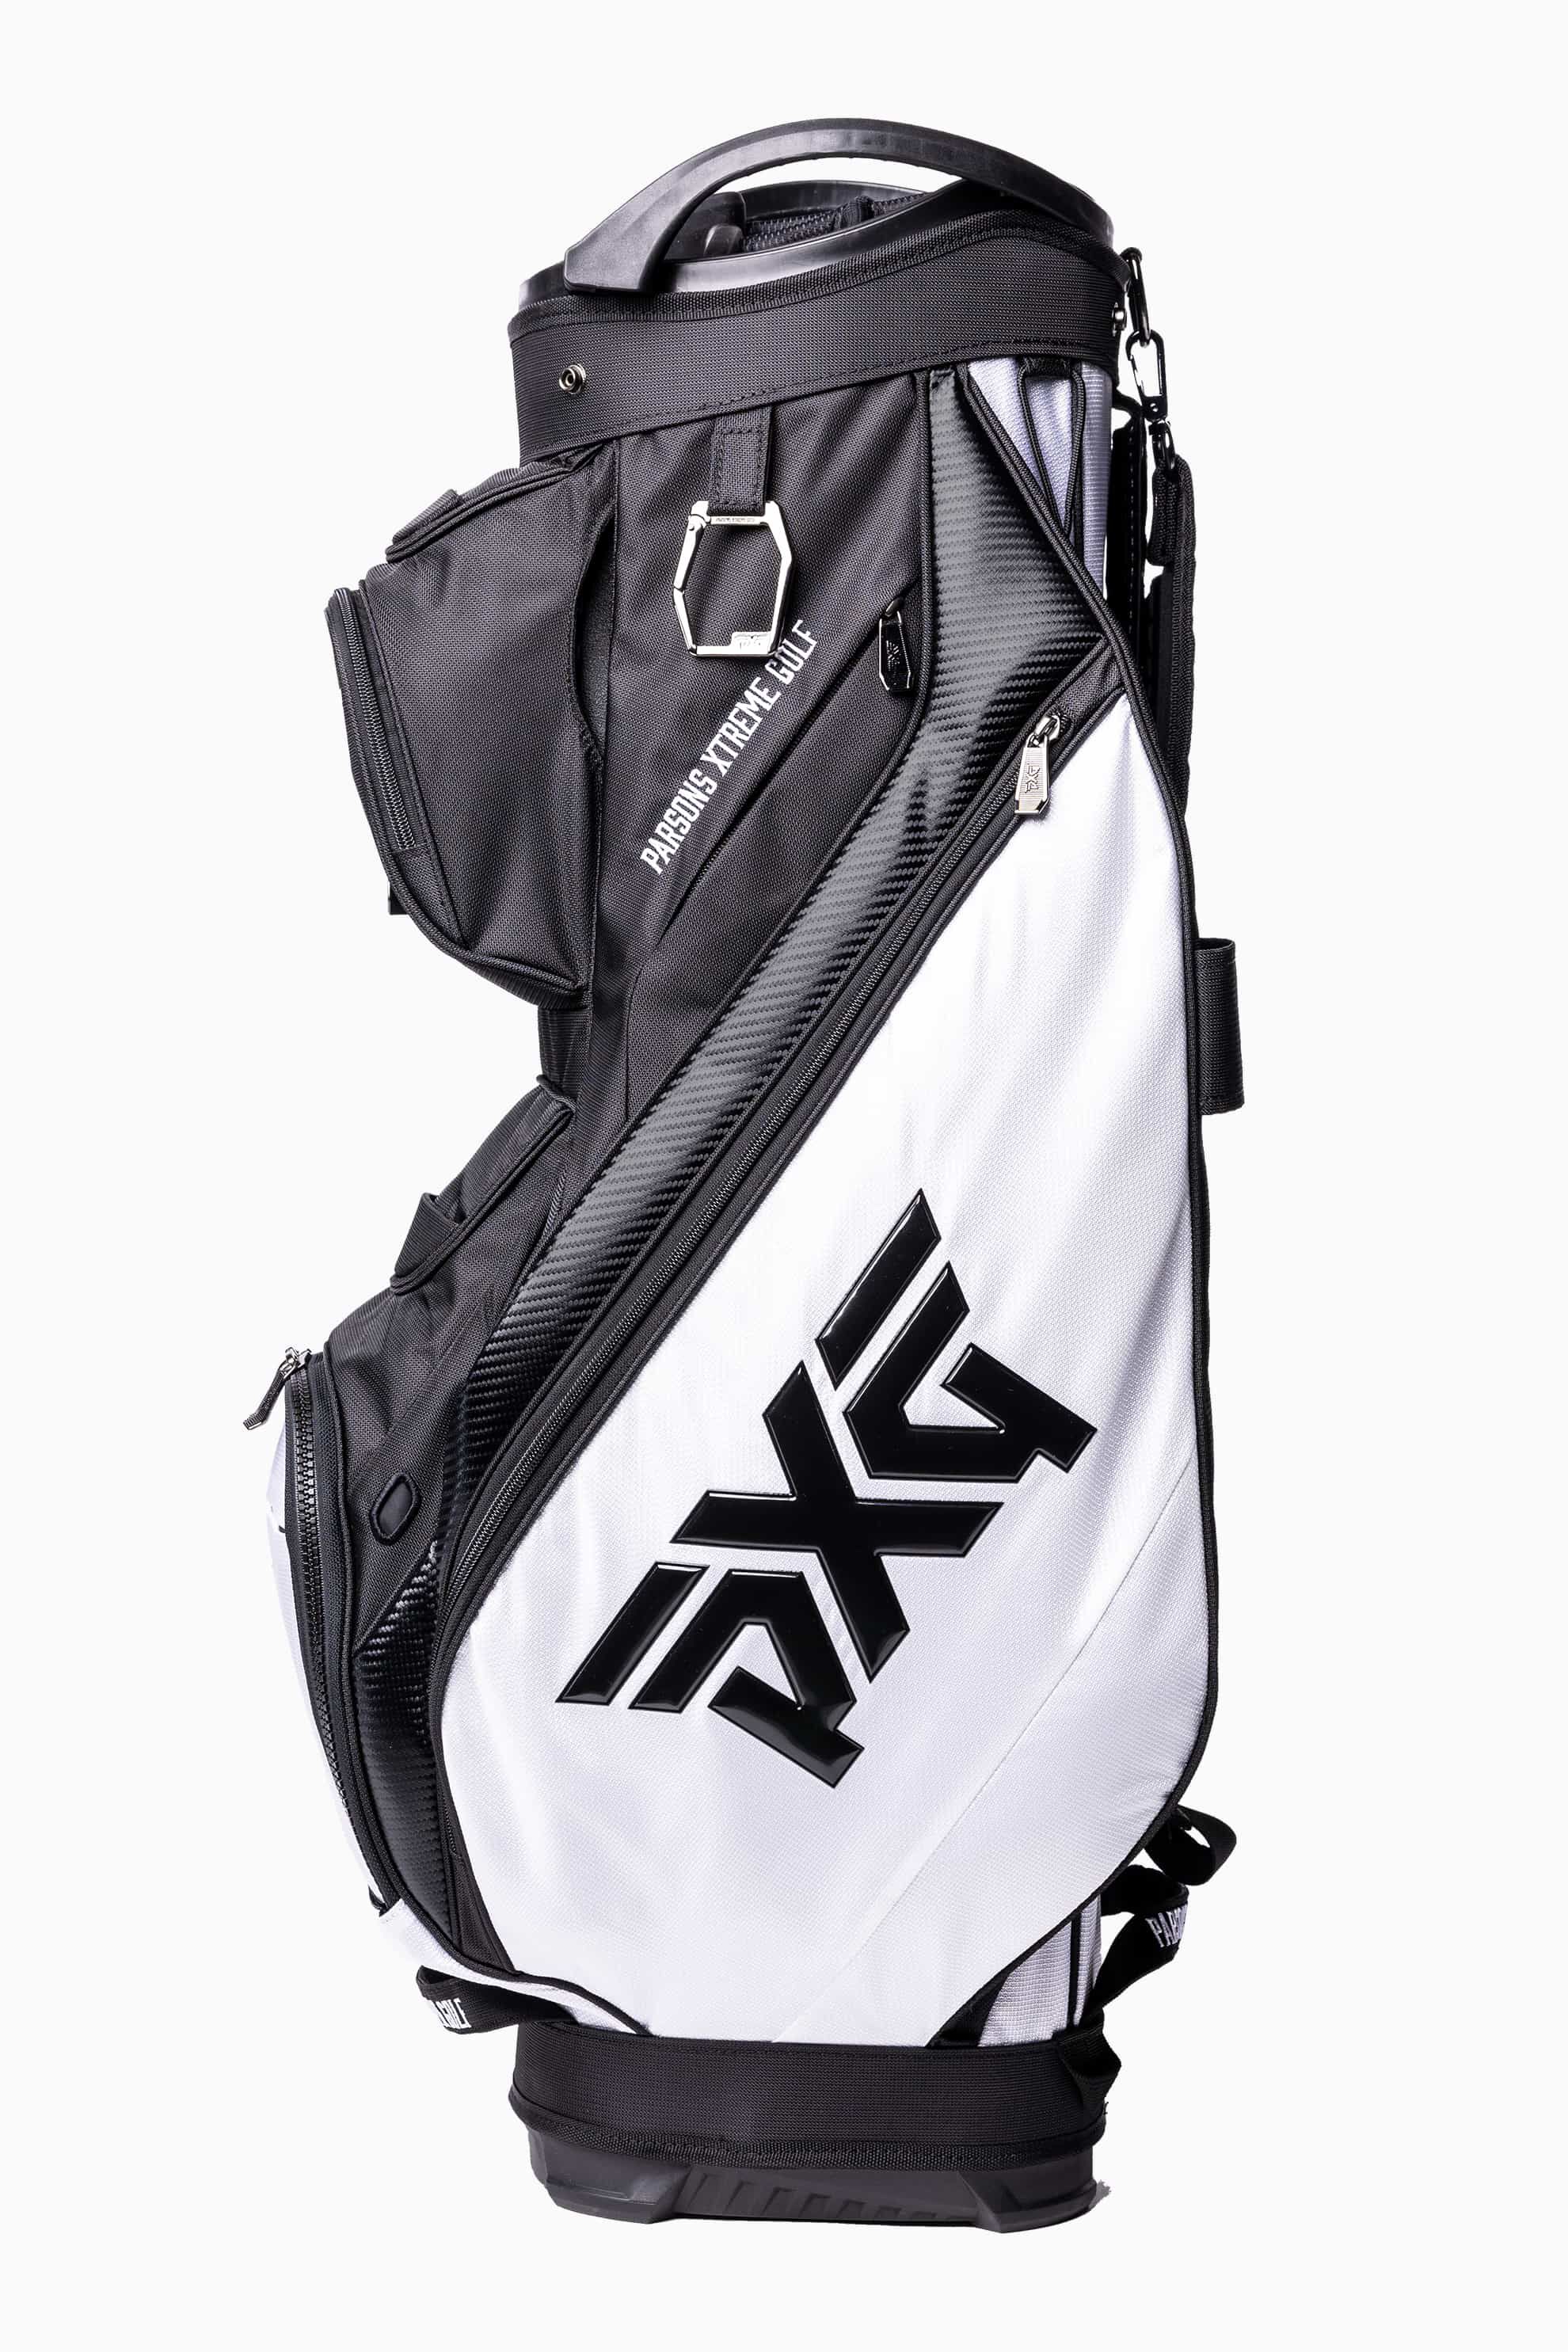 Golf Bags for sale  UK Delivery  Clarkes Golf Centre